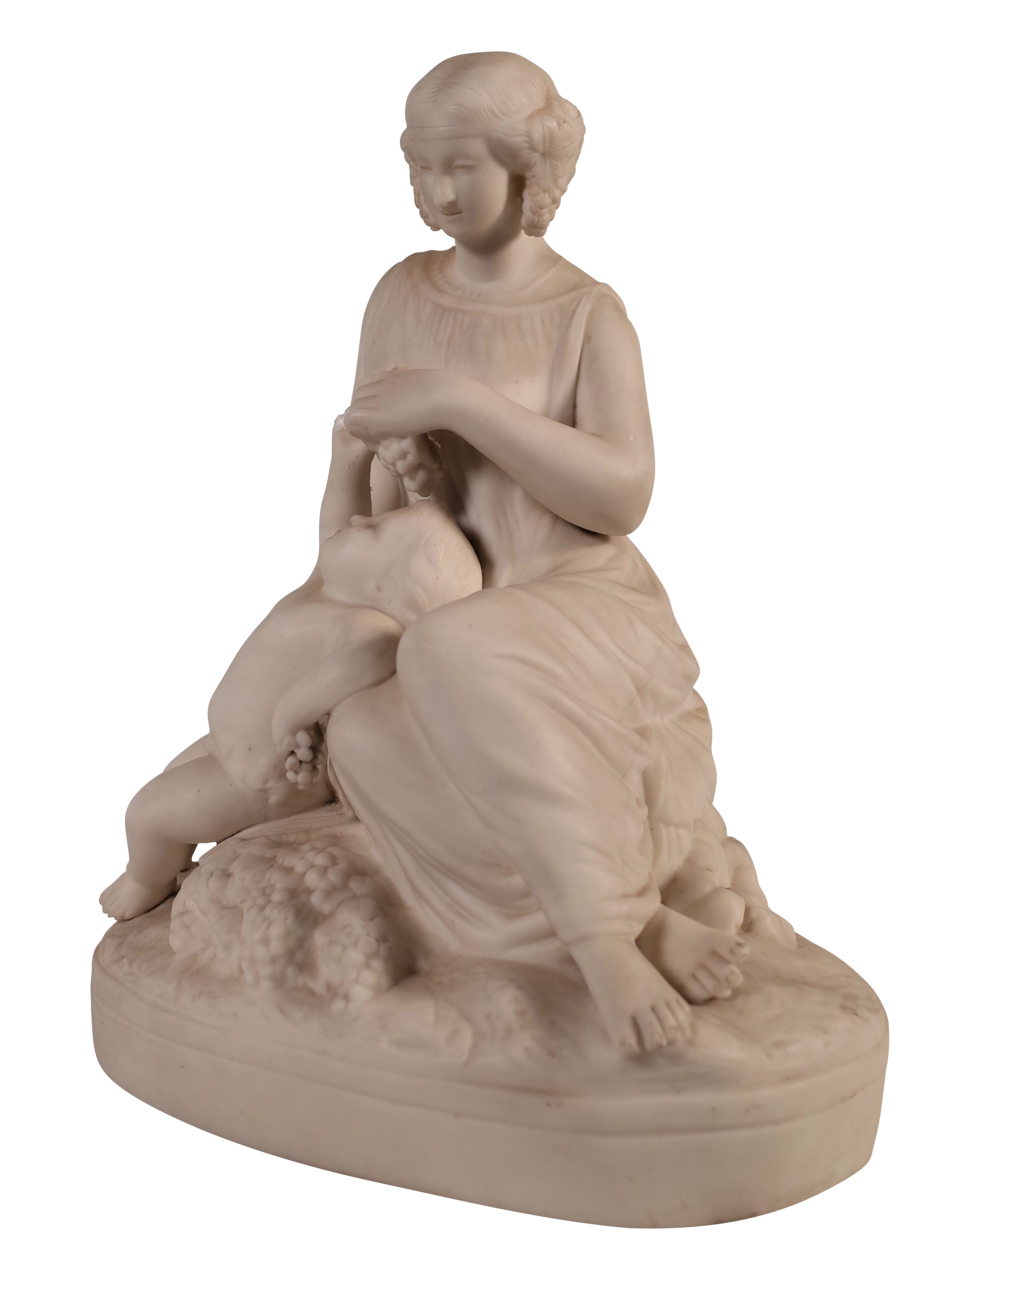 Parian Ware figure of a Seated Woman Feeding Grapes to a Child